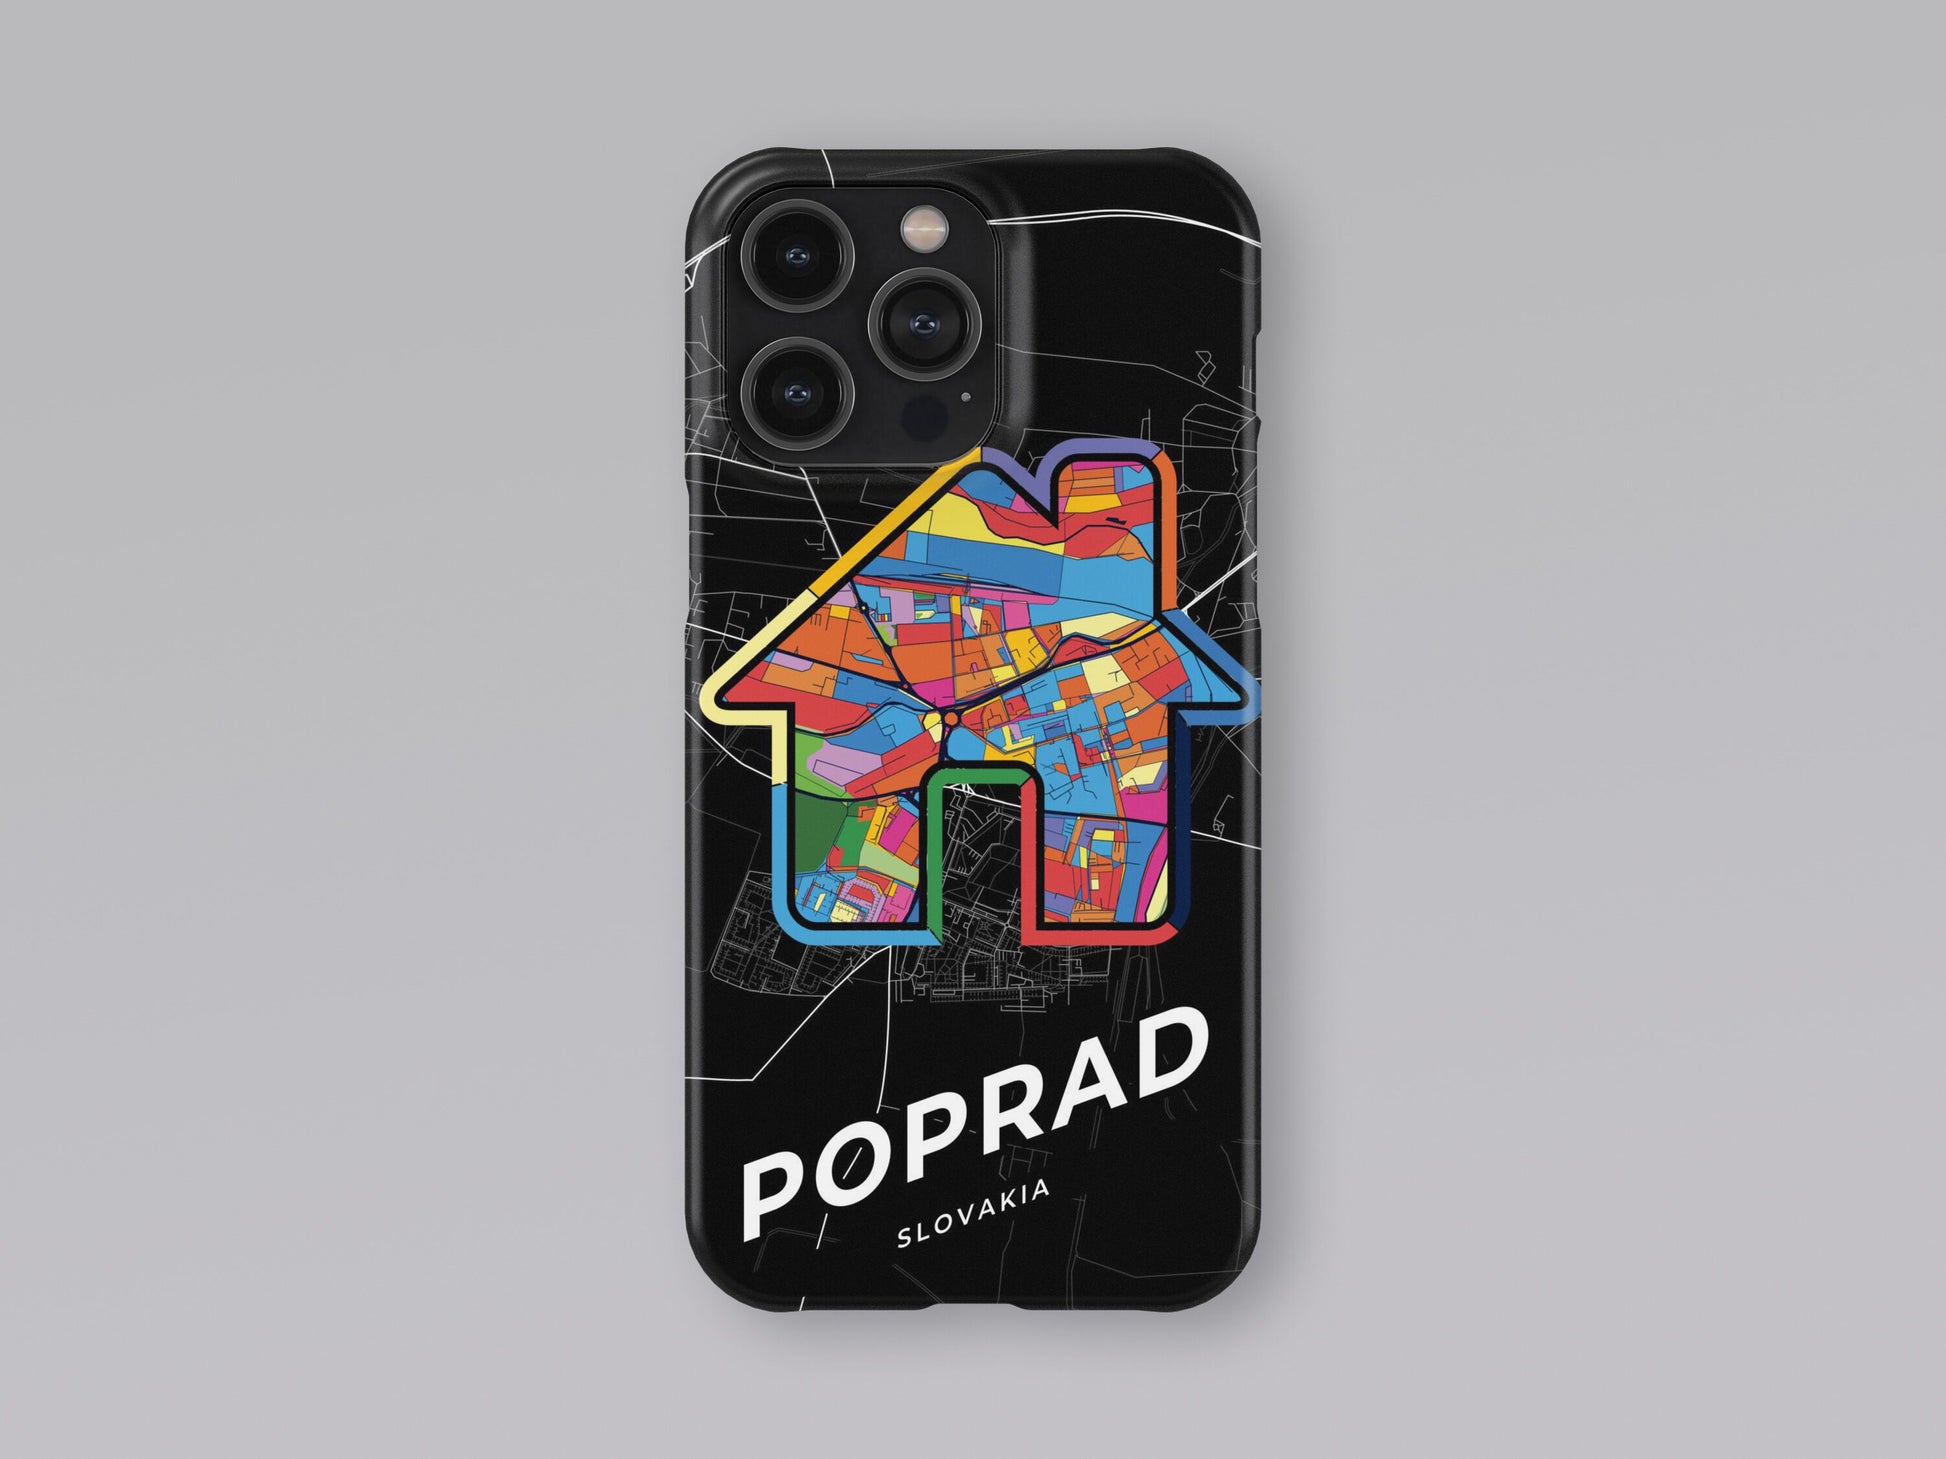 Poprad Slovakia slim phone case with colorful icon. Birthday, wedding or housewarming gift. Couple match cases. 3